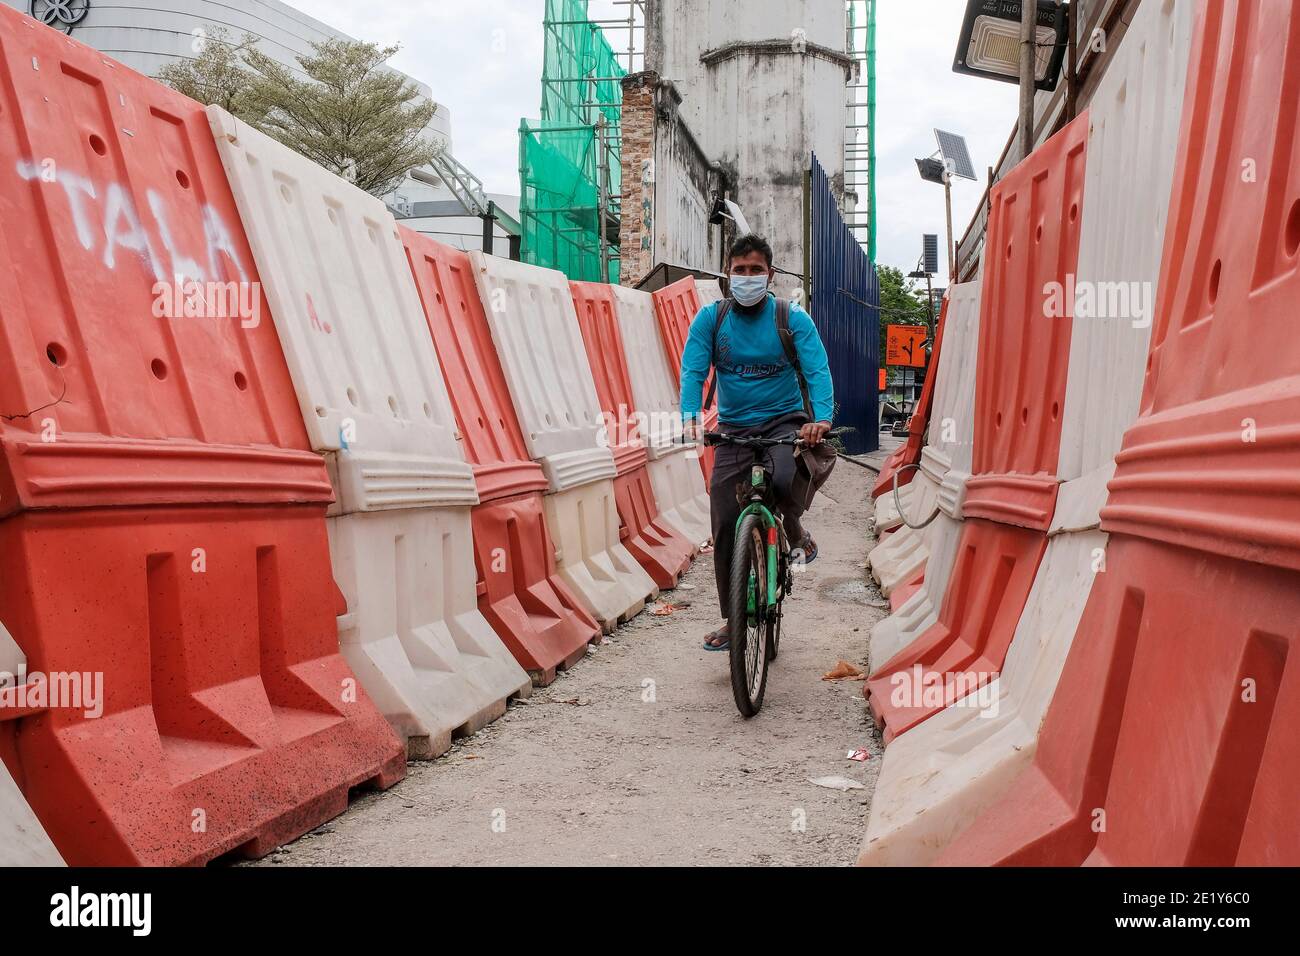 A foreign worker wearing a face mask as a precaution against the spread of Covid-19 rides a bike through barricades in Kuala Lumpur. Stock Photo